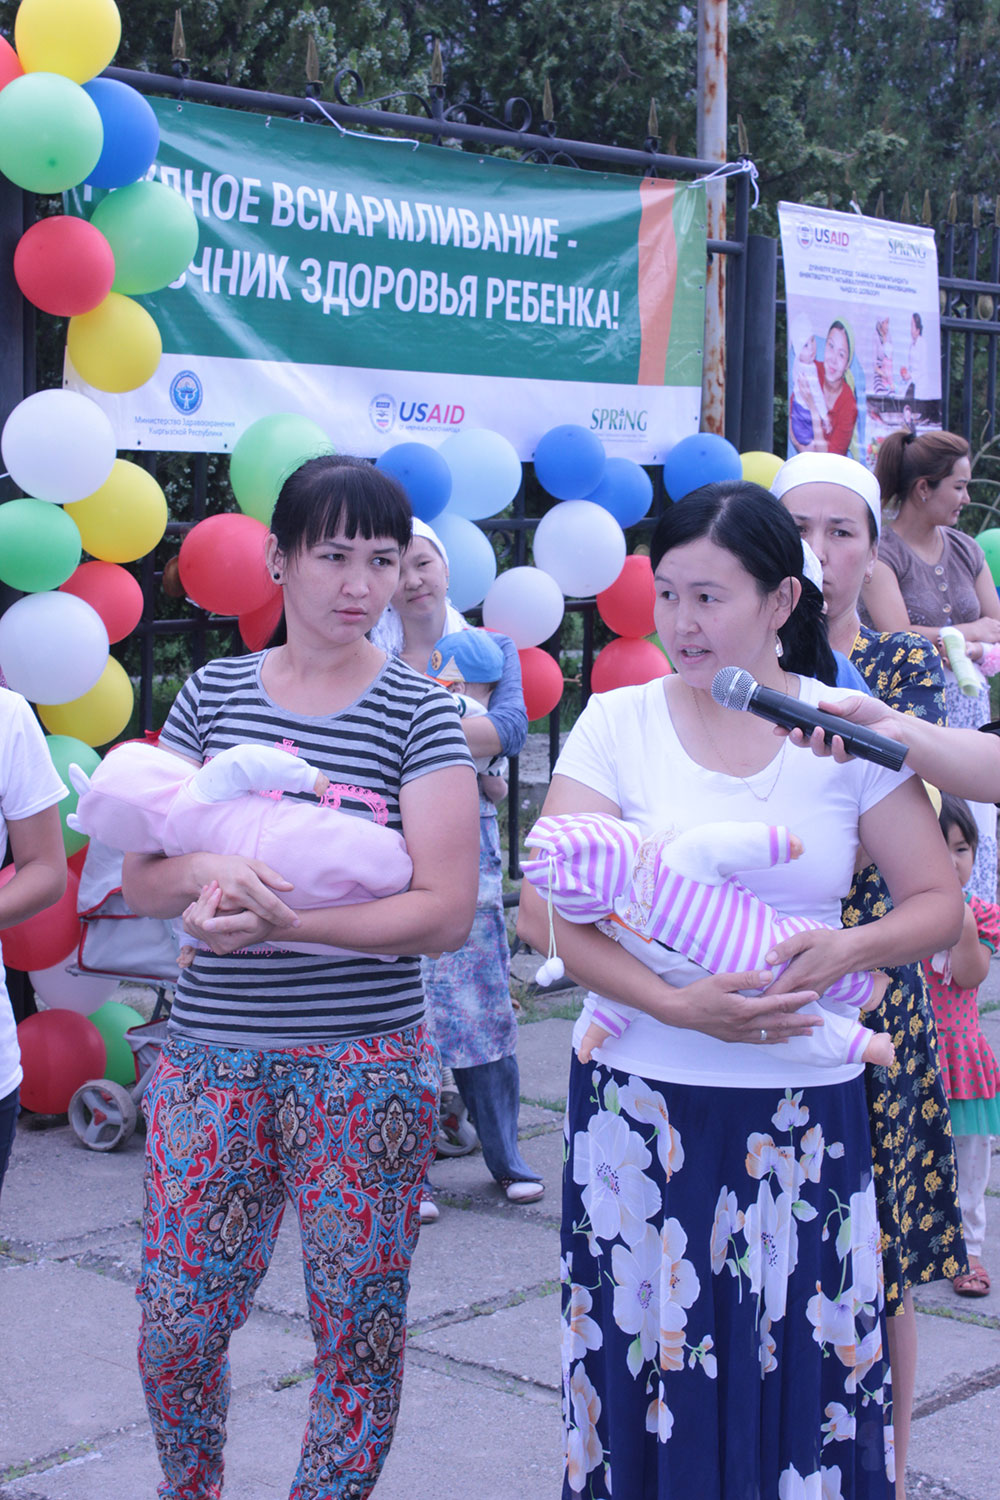 Participants in the World Breastfeeding Week event take part in a quiz about optimal feeding practices.